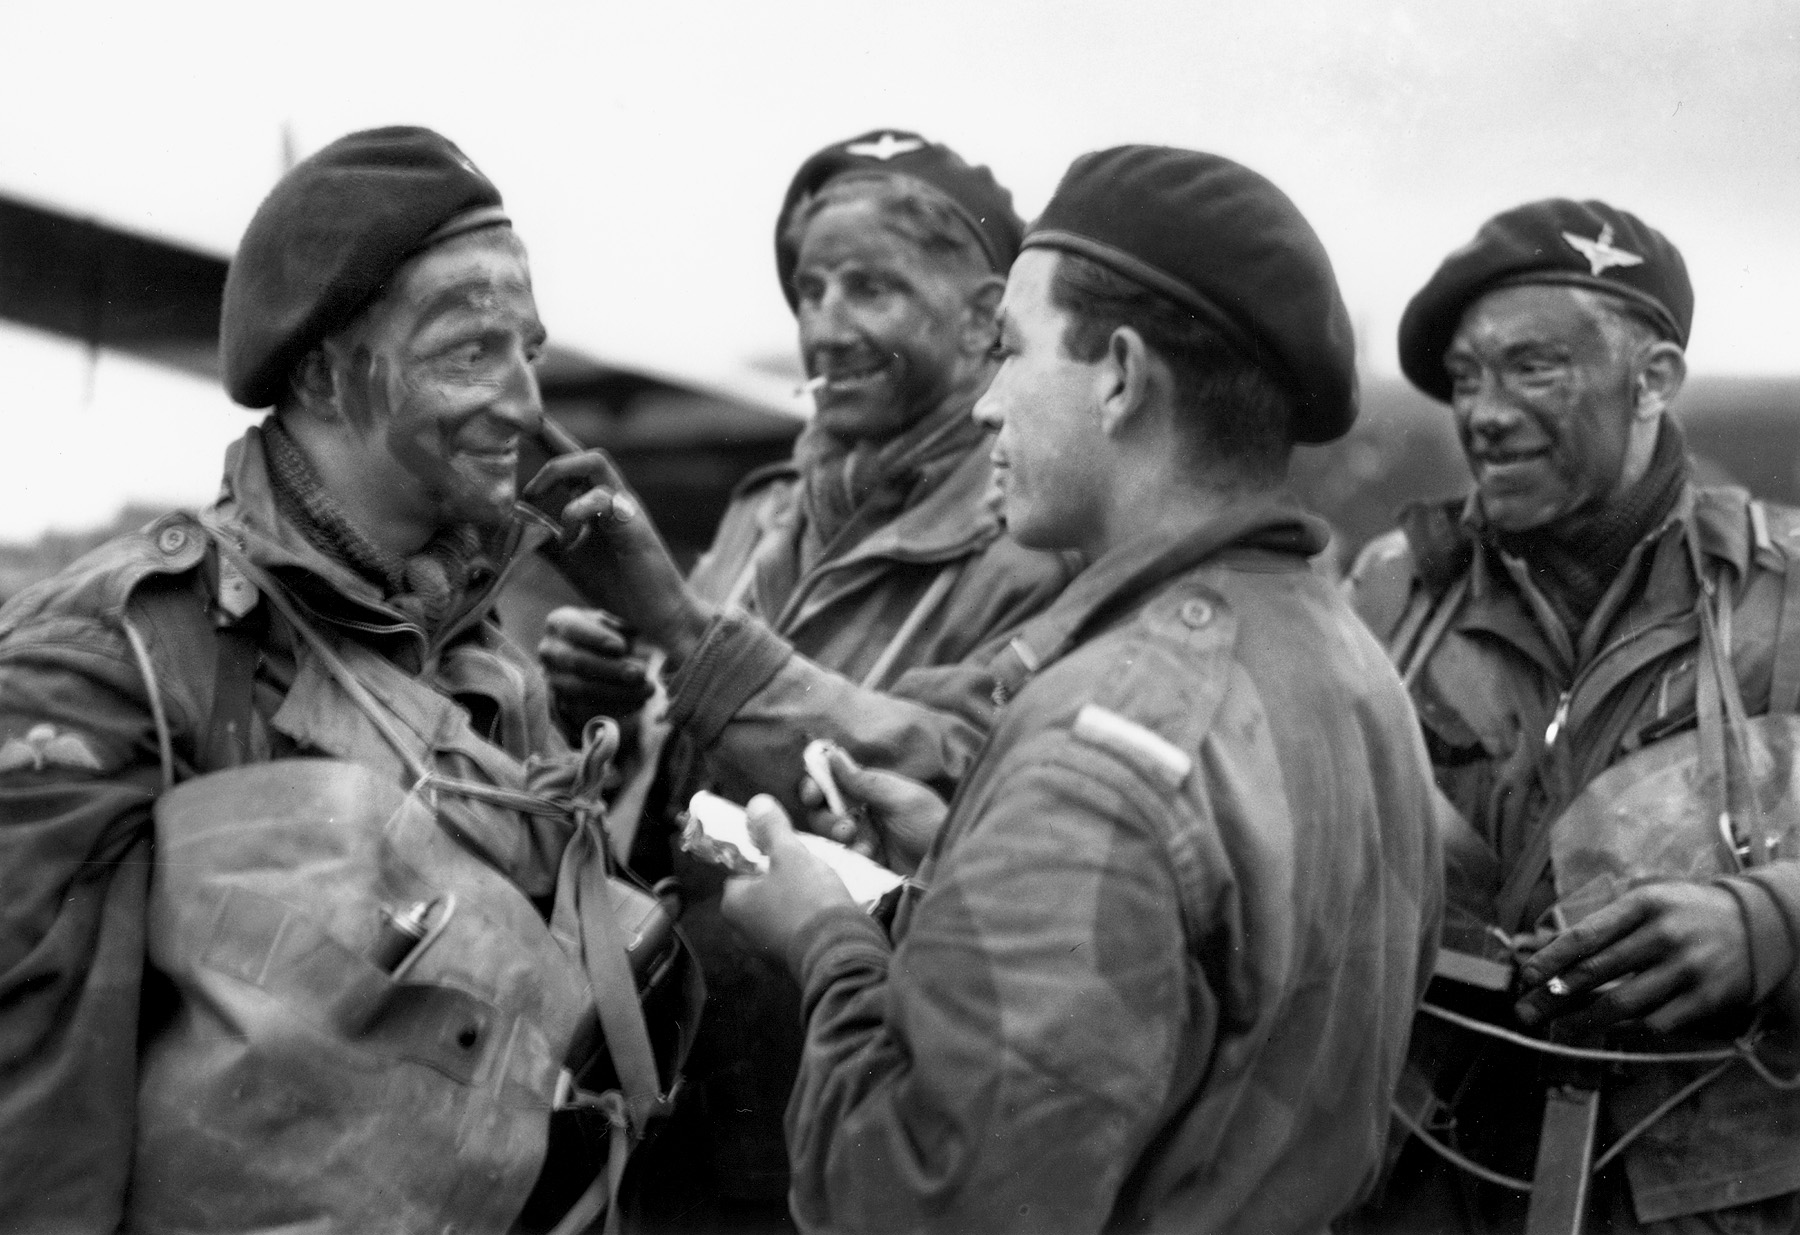 British airborne troops apply lampblack to their faces before boarding their gliders and transports on the evening of June 5. 